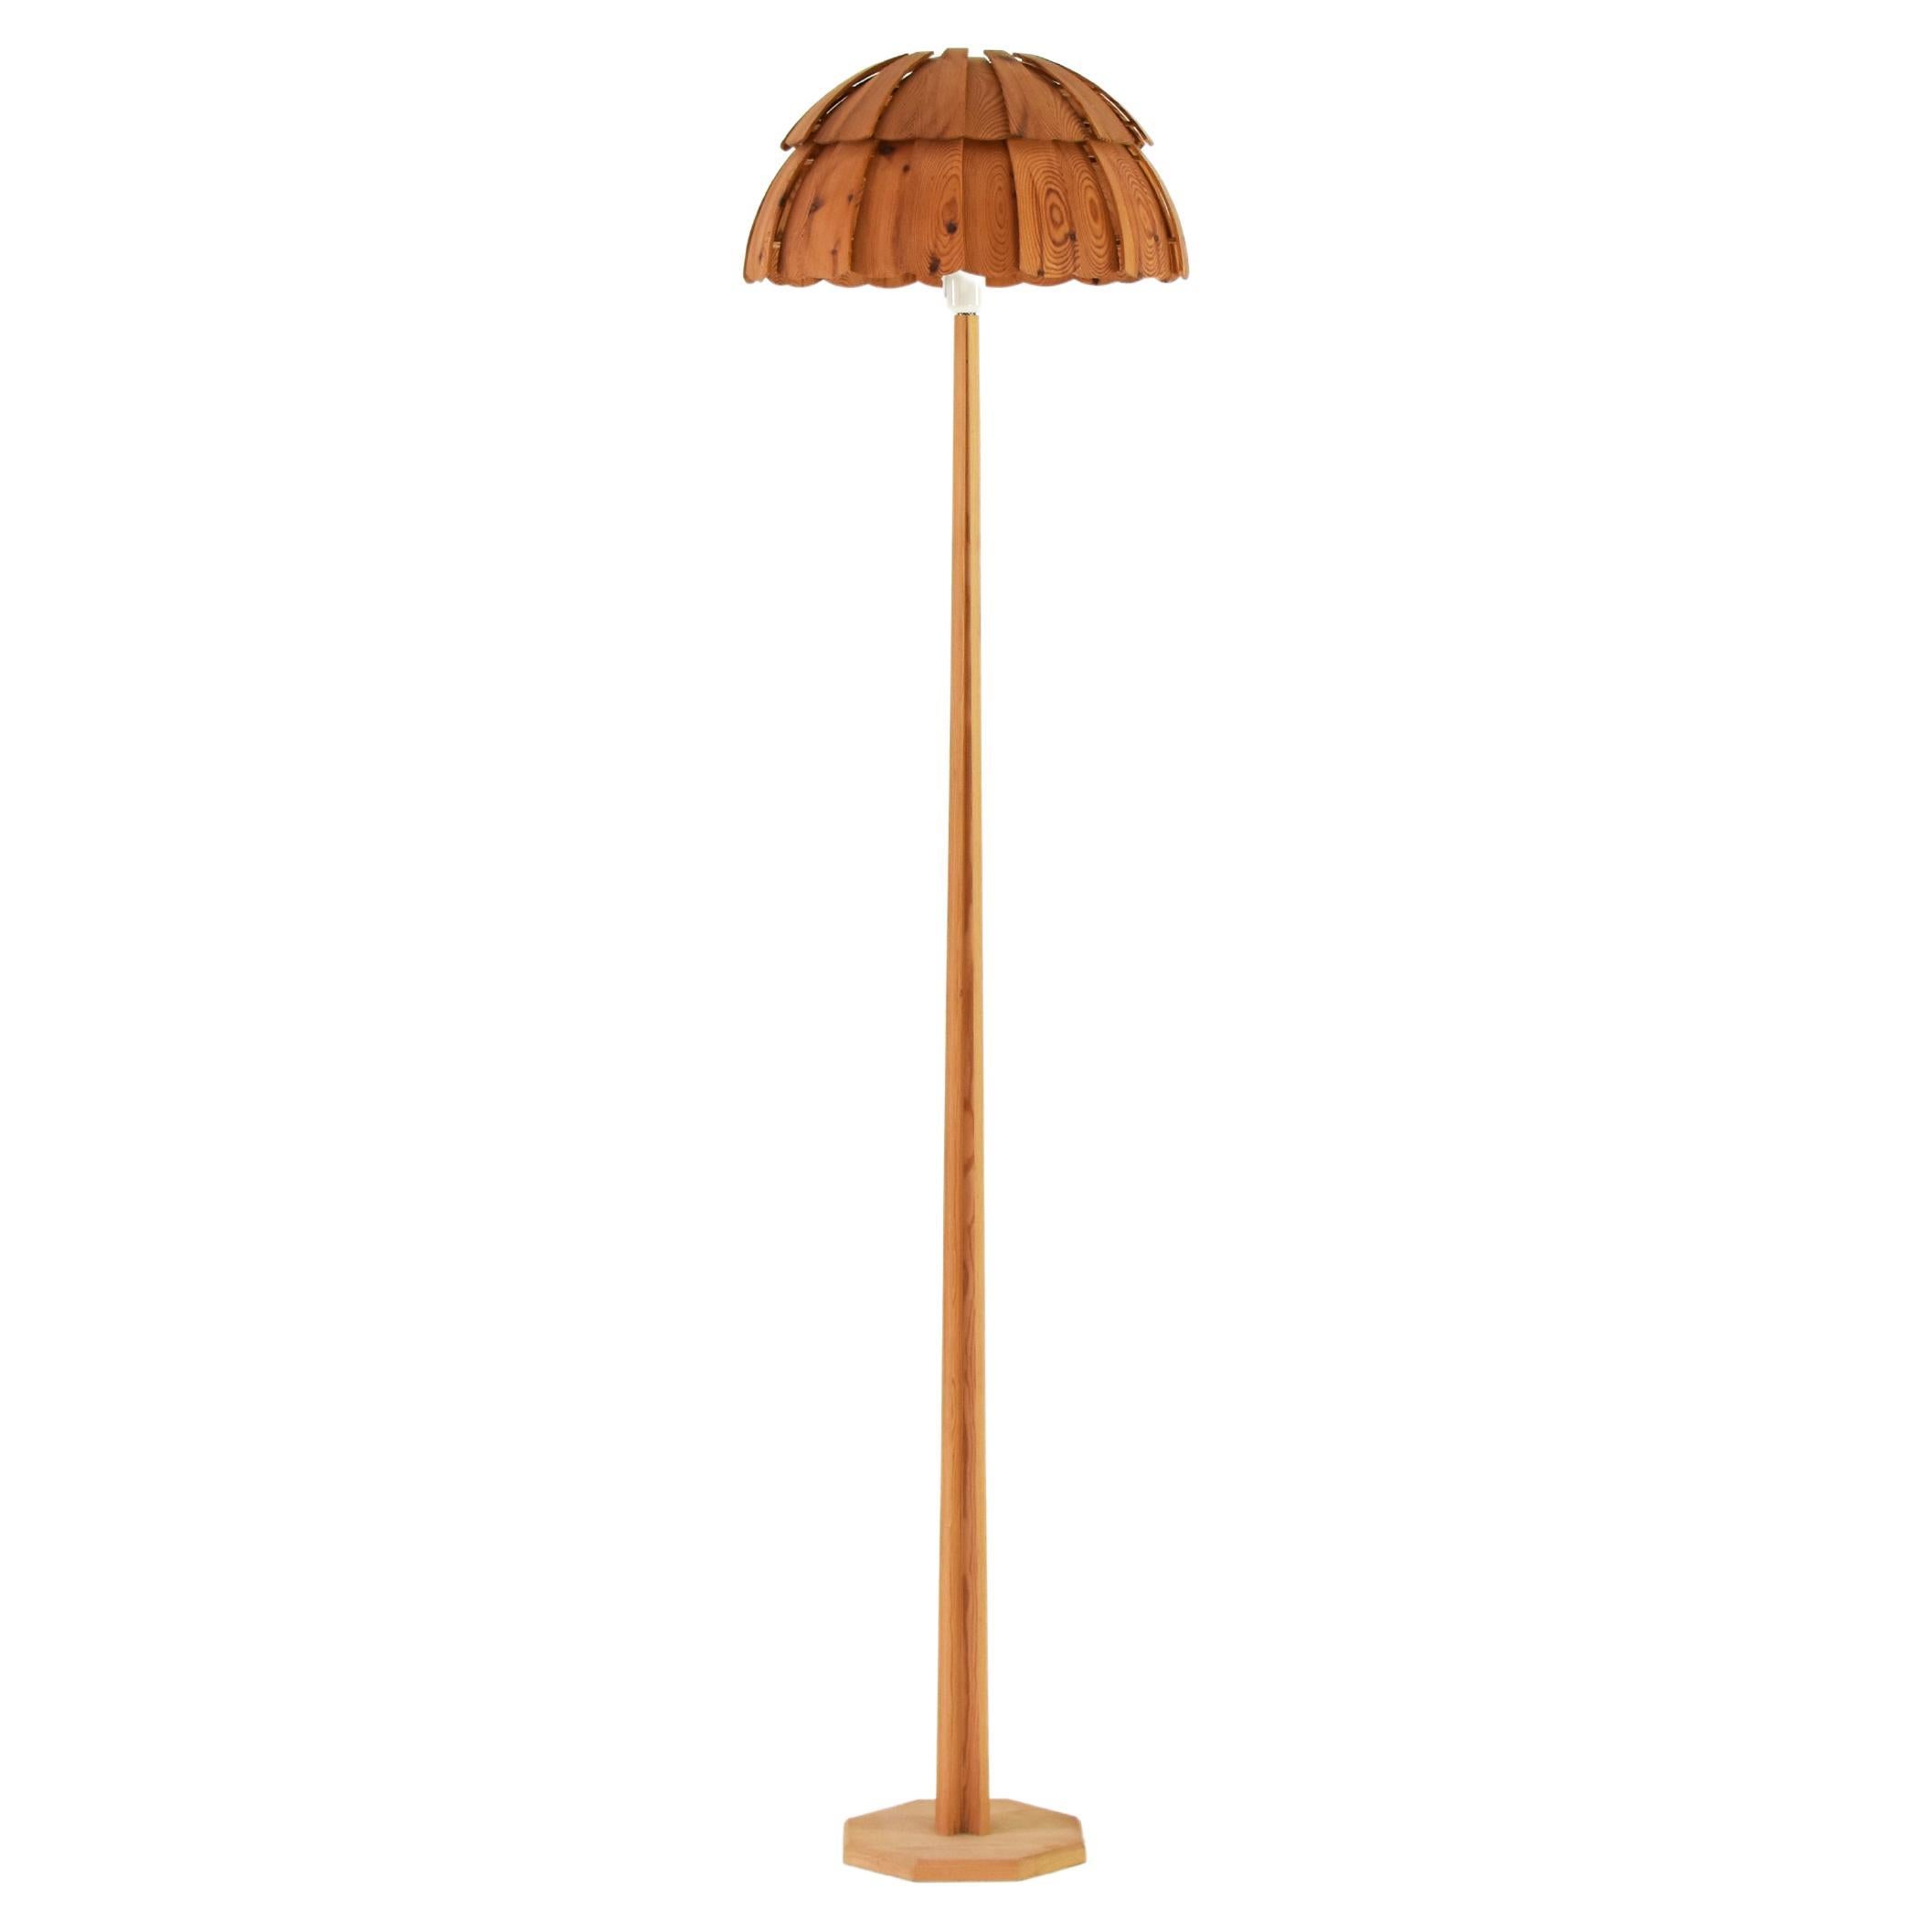 Tall Organic ‘Mushroom’ Floor Lamp in Pine from Sweden, Dating from the 1960s